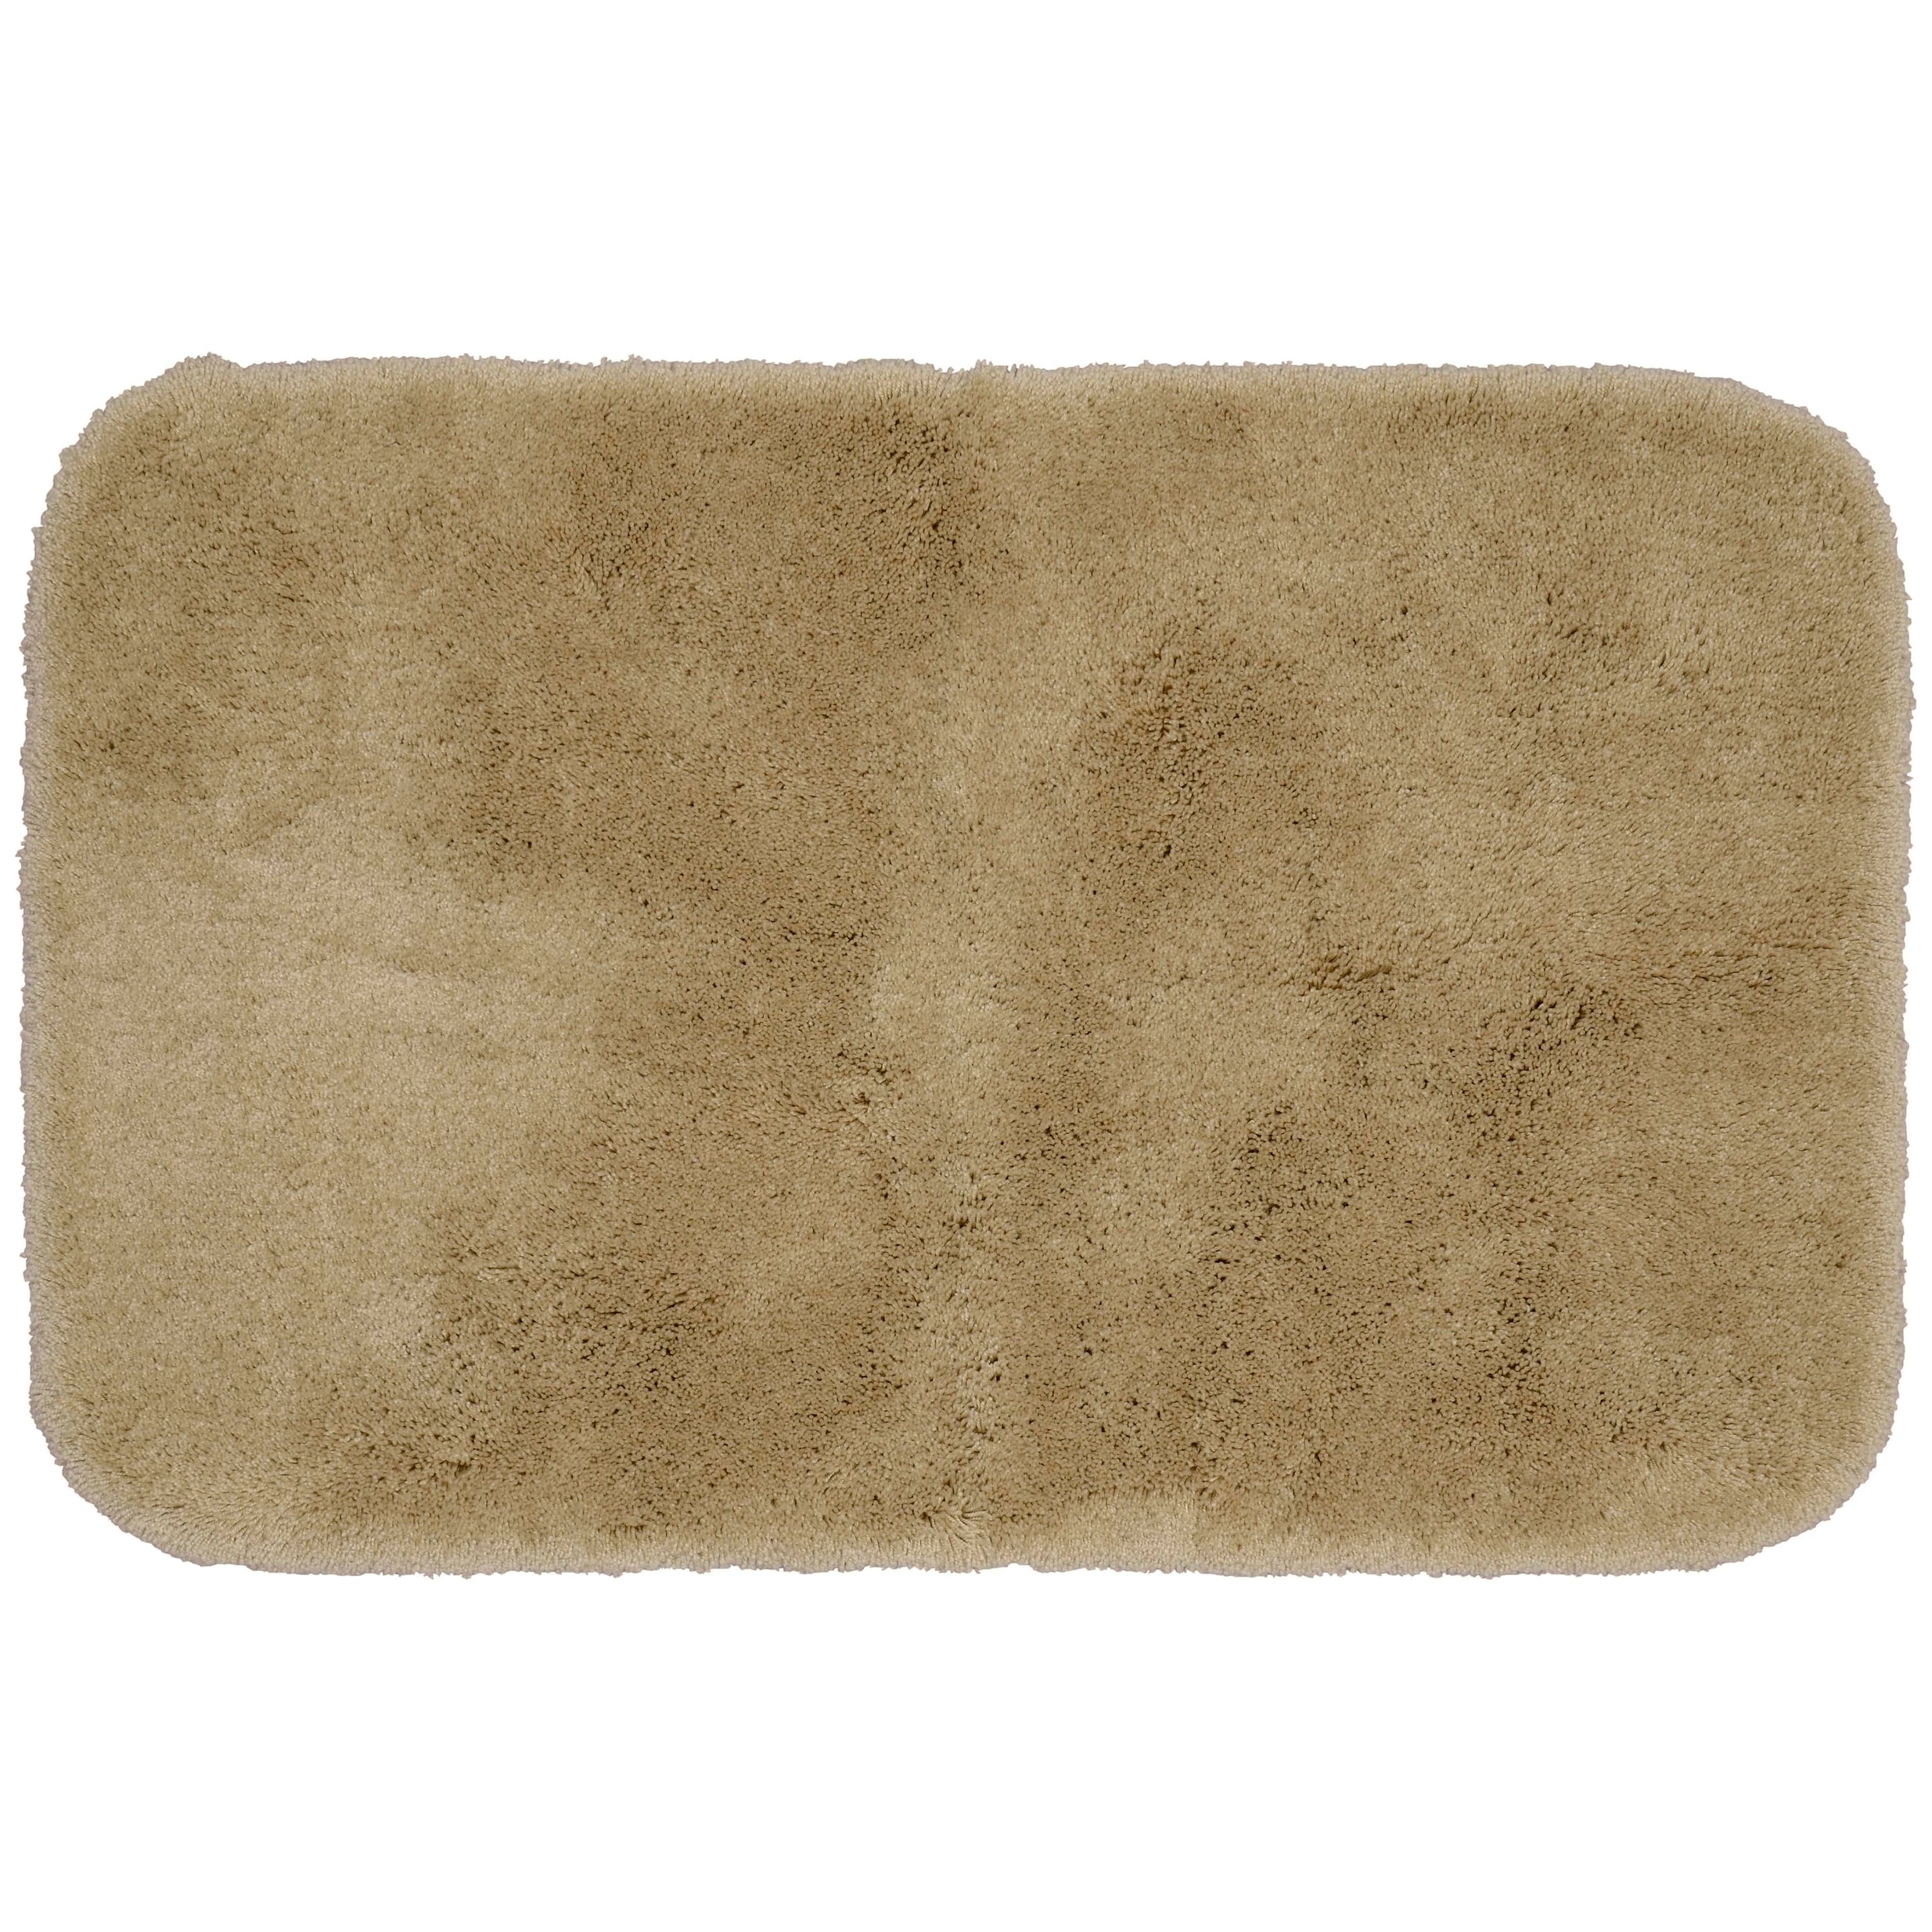 https://ak1.ostkcdn.com/images/products/is/images/direct/c6390d0a64cf50c7889c5301691390b480353384/Finest-Luxury-Taupe-Ultra-Plush-Washable-Bath-Rug-Runner.jpg